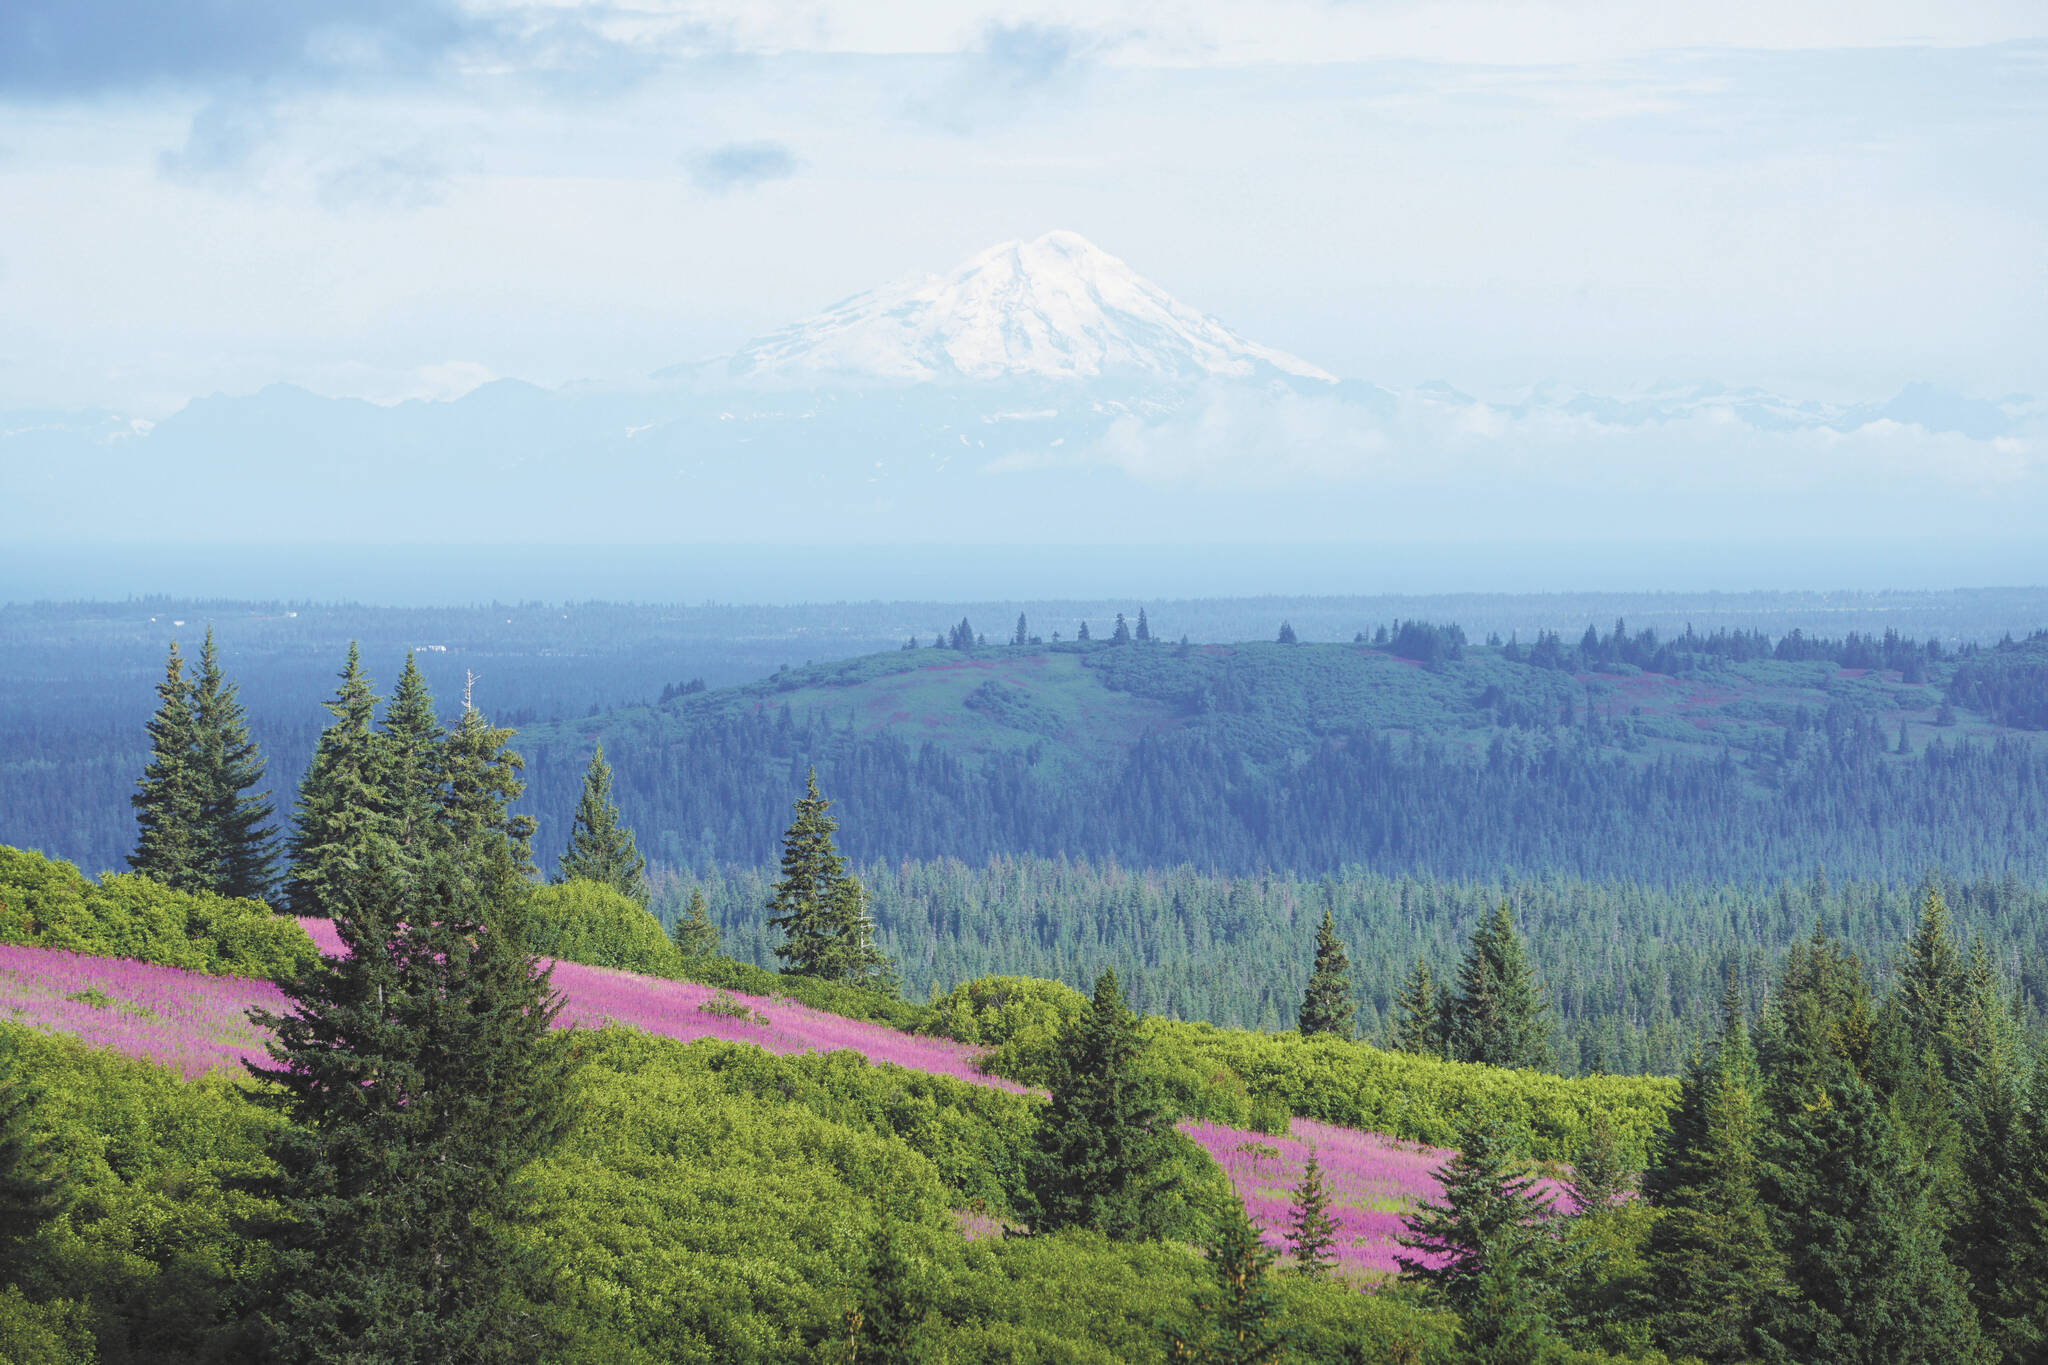 Photo by Michael Armstrong/Homer News
Mount Redoubt rises above Cook Inlet and the Anchor River drainage as fireweed is in bloom, as seen from Diamond Ridge Road on July 22 near Homer.